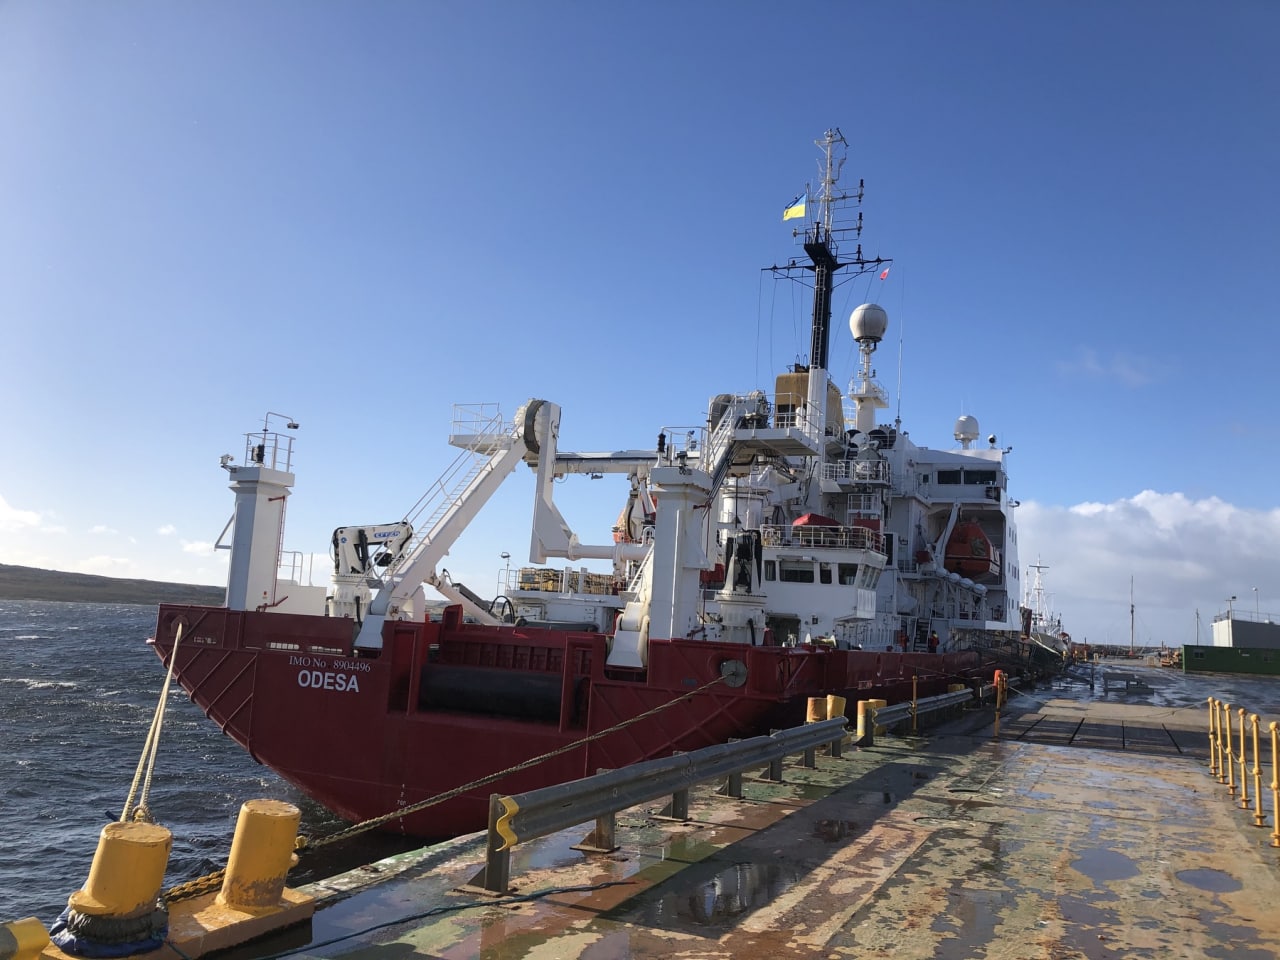 "Noosphere" is in the Falkland Islands and is preparing to move to Cape Town